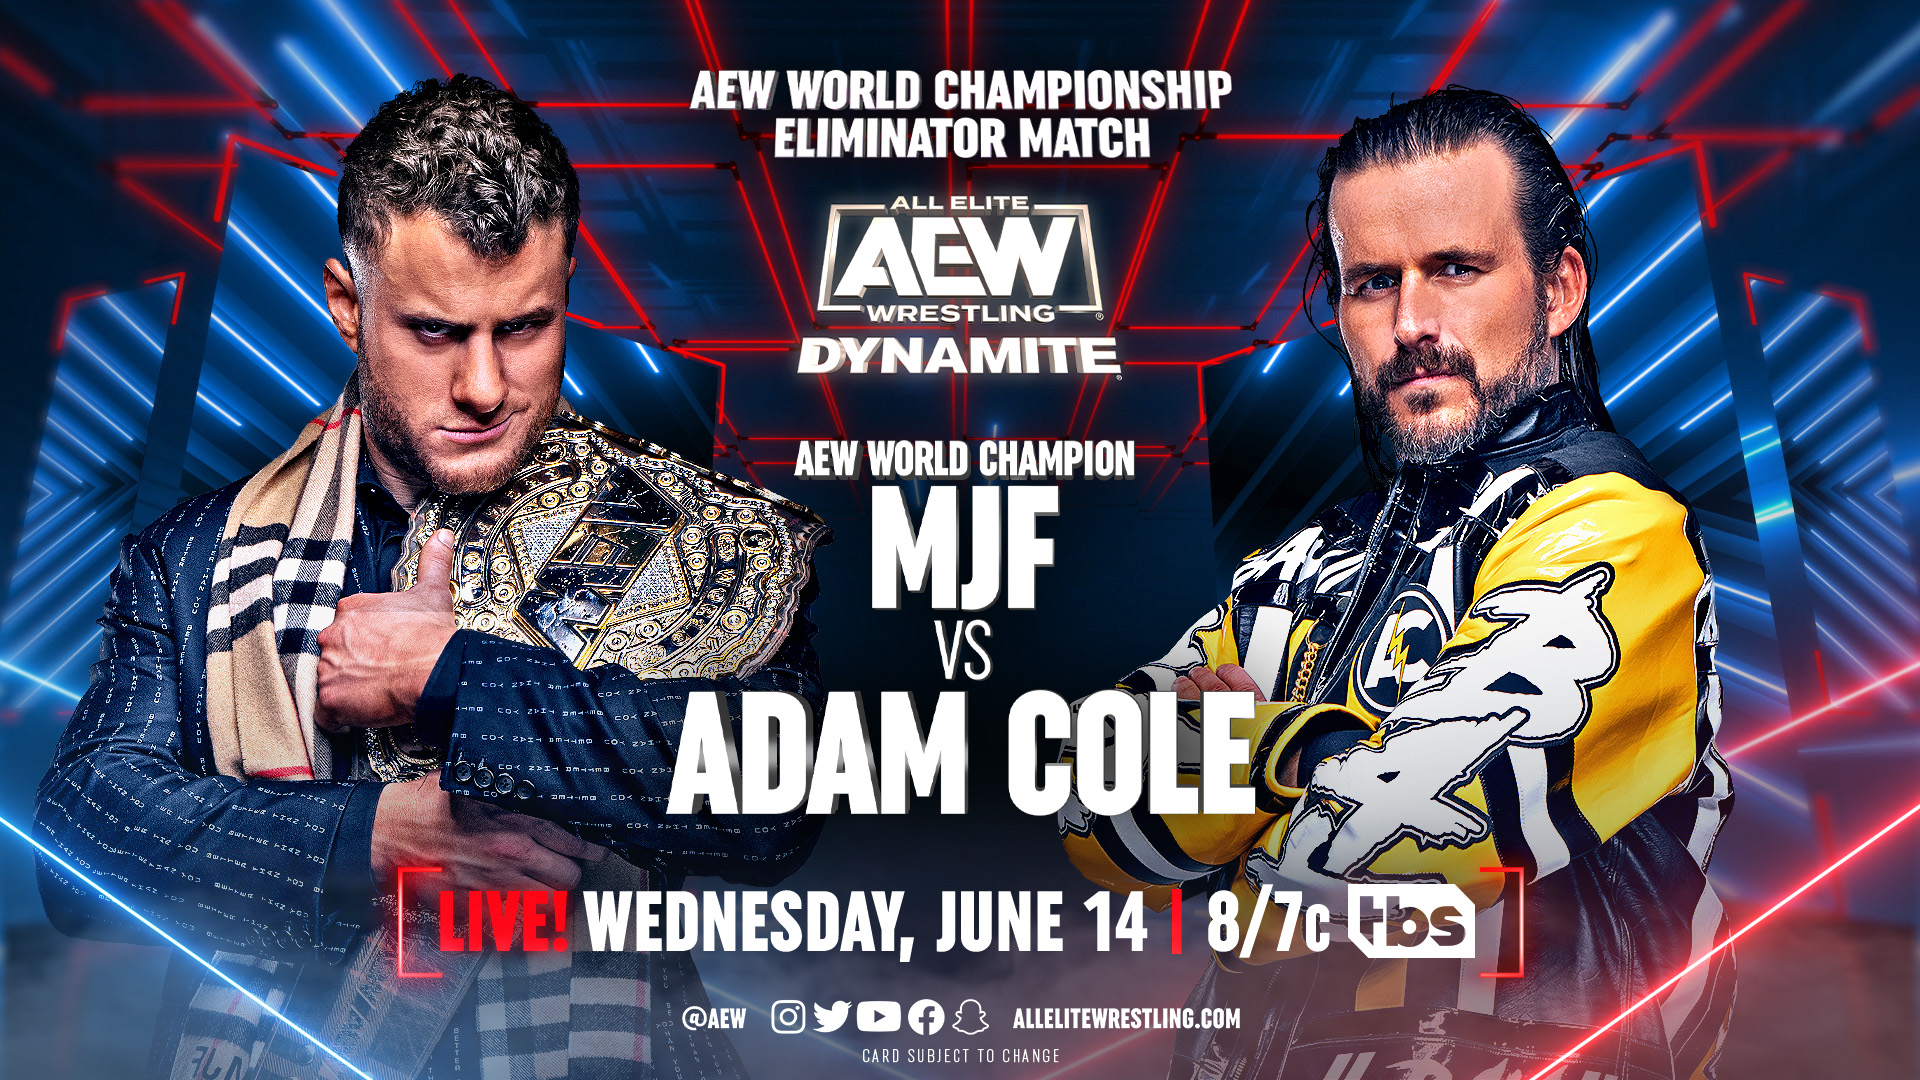 An AEW Dynamite match graphic that features MJF and Adam Cole.